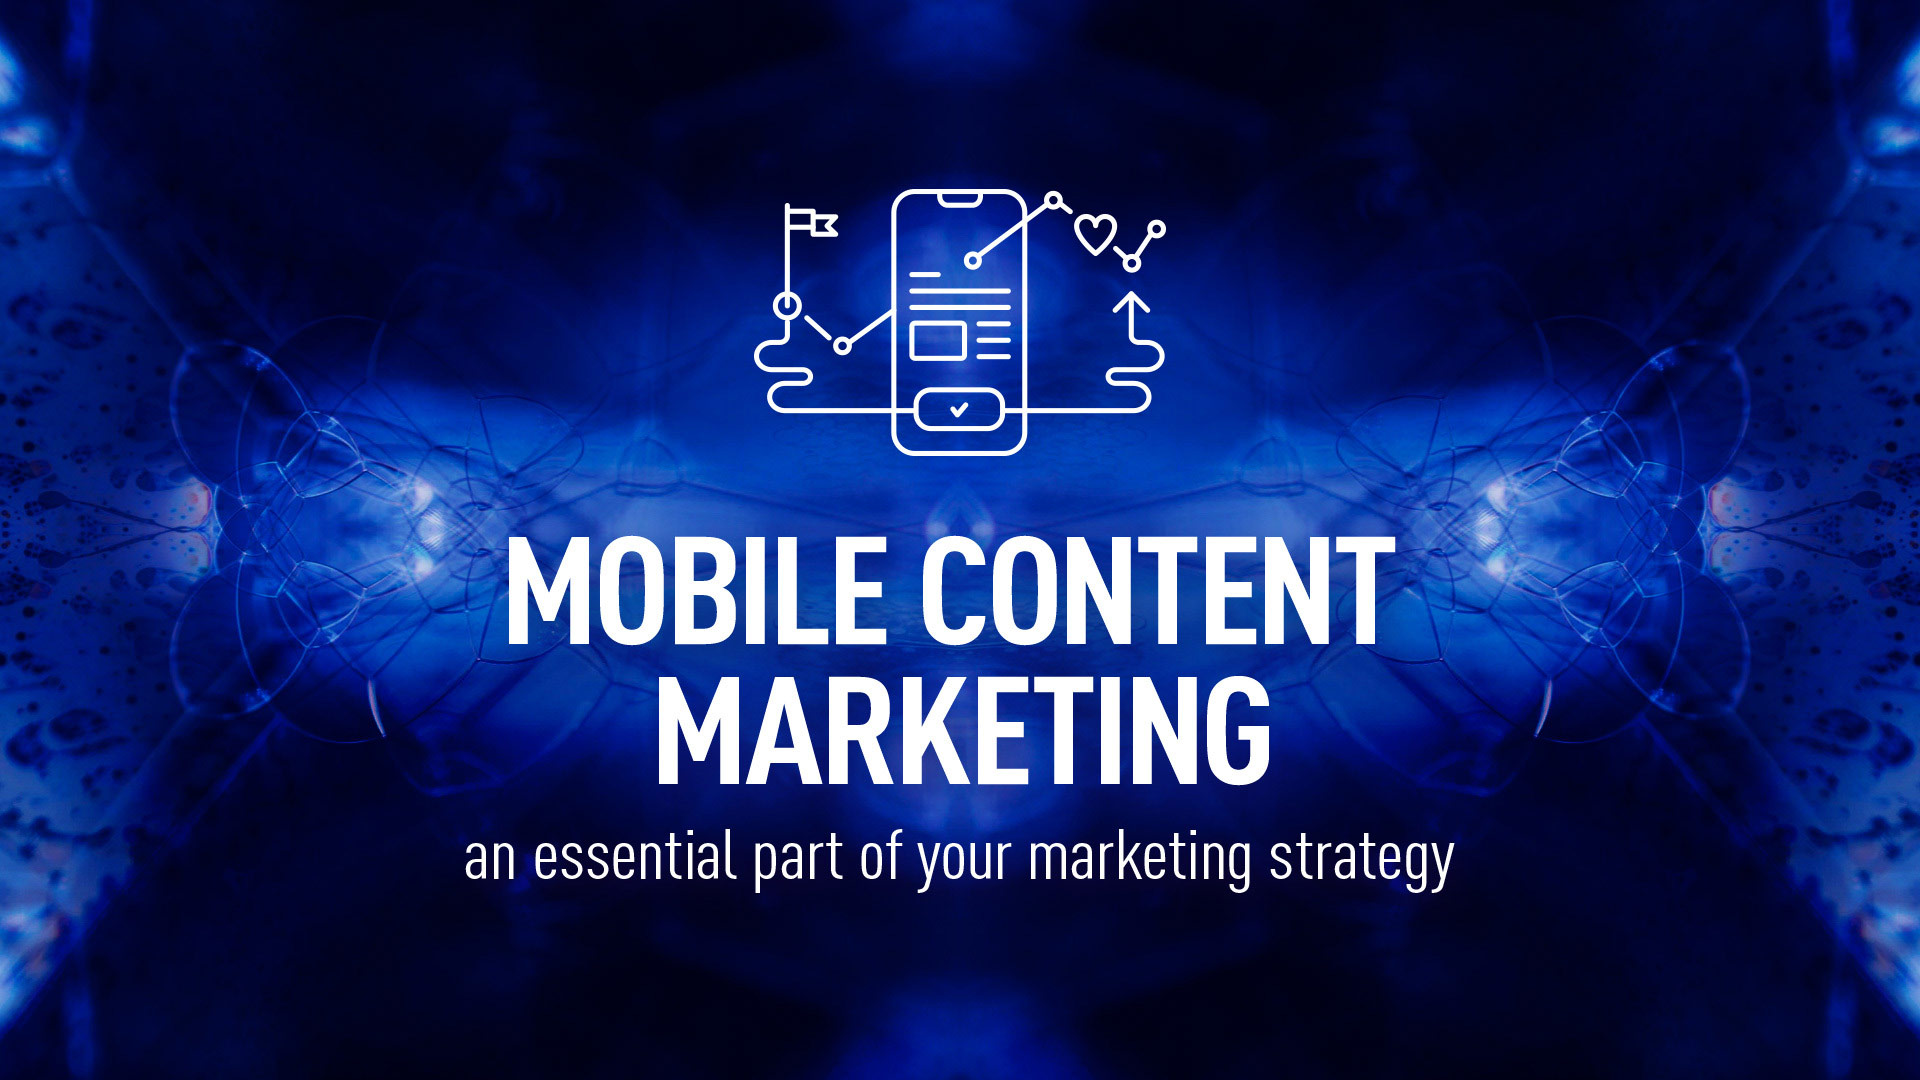 Mobile content marketing